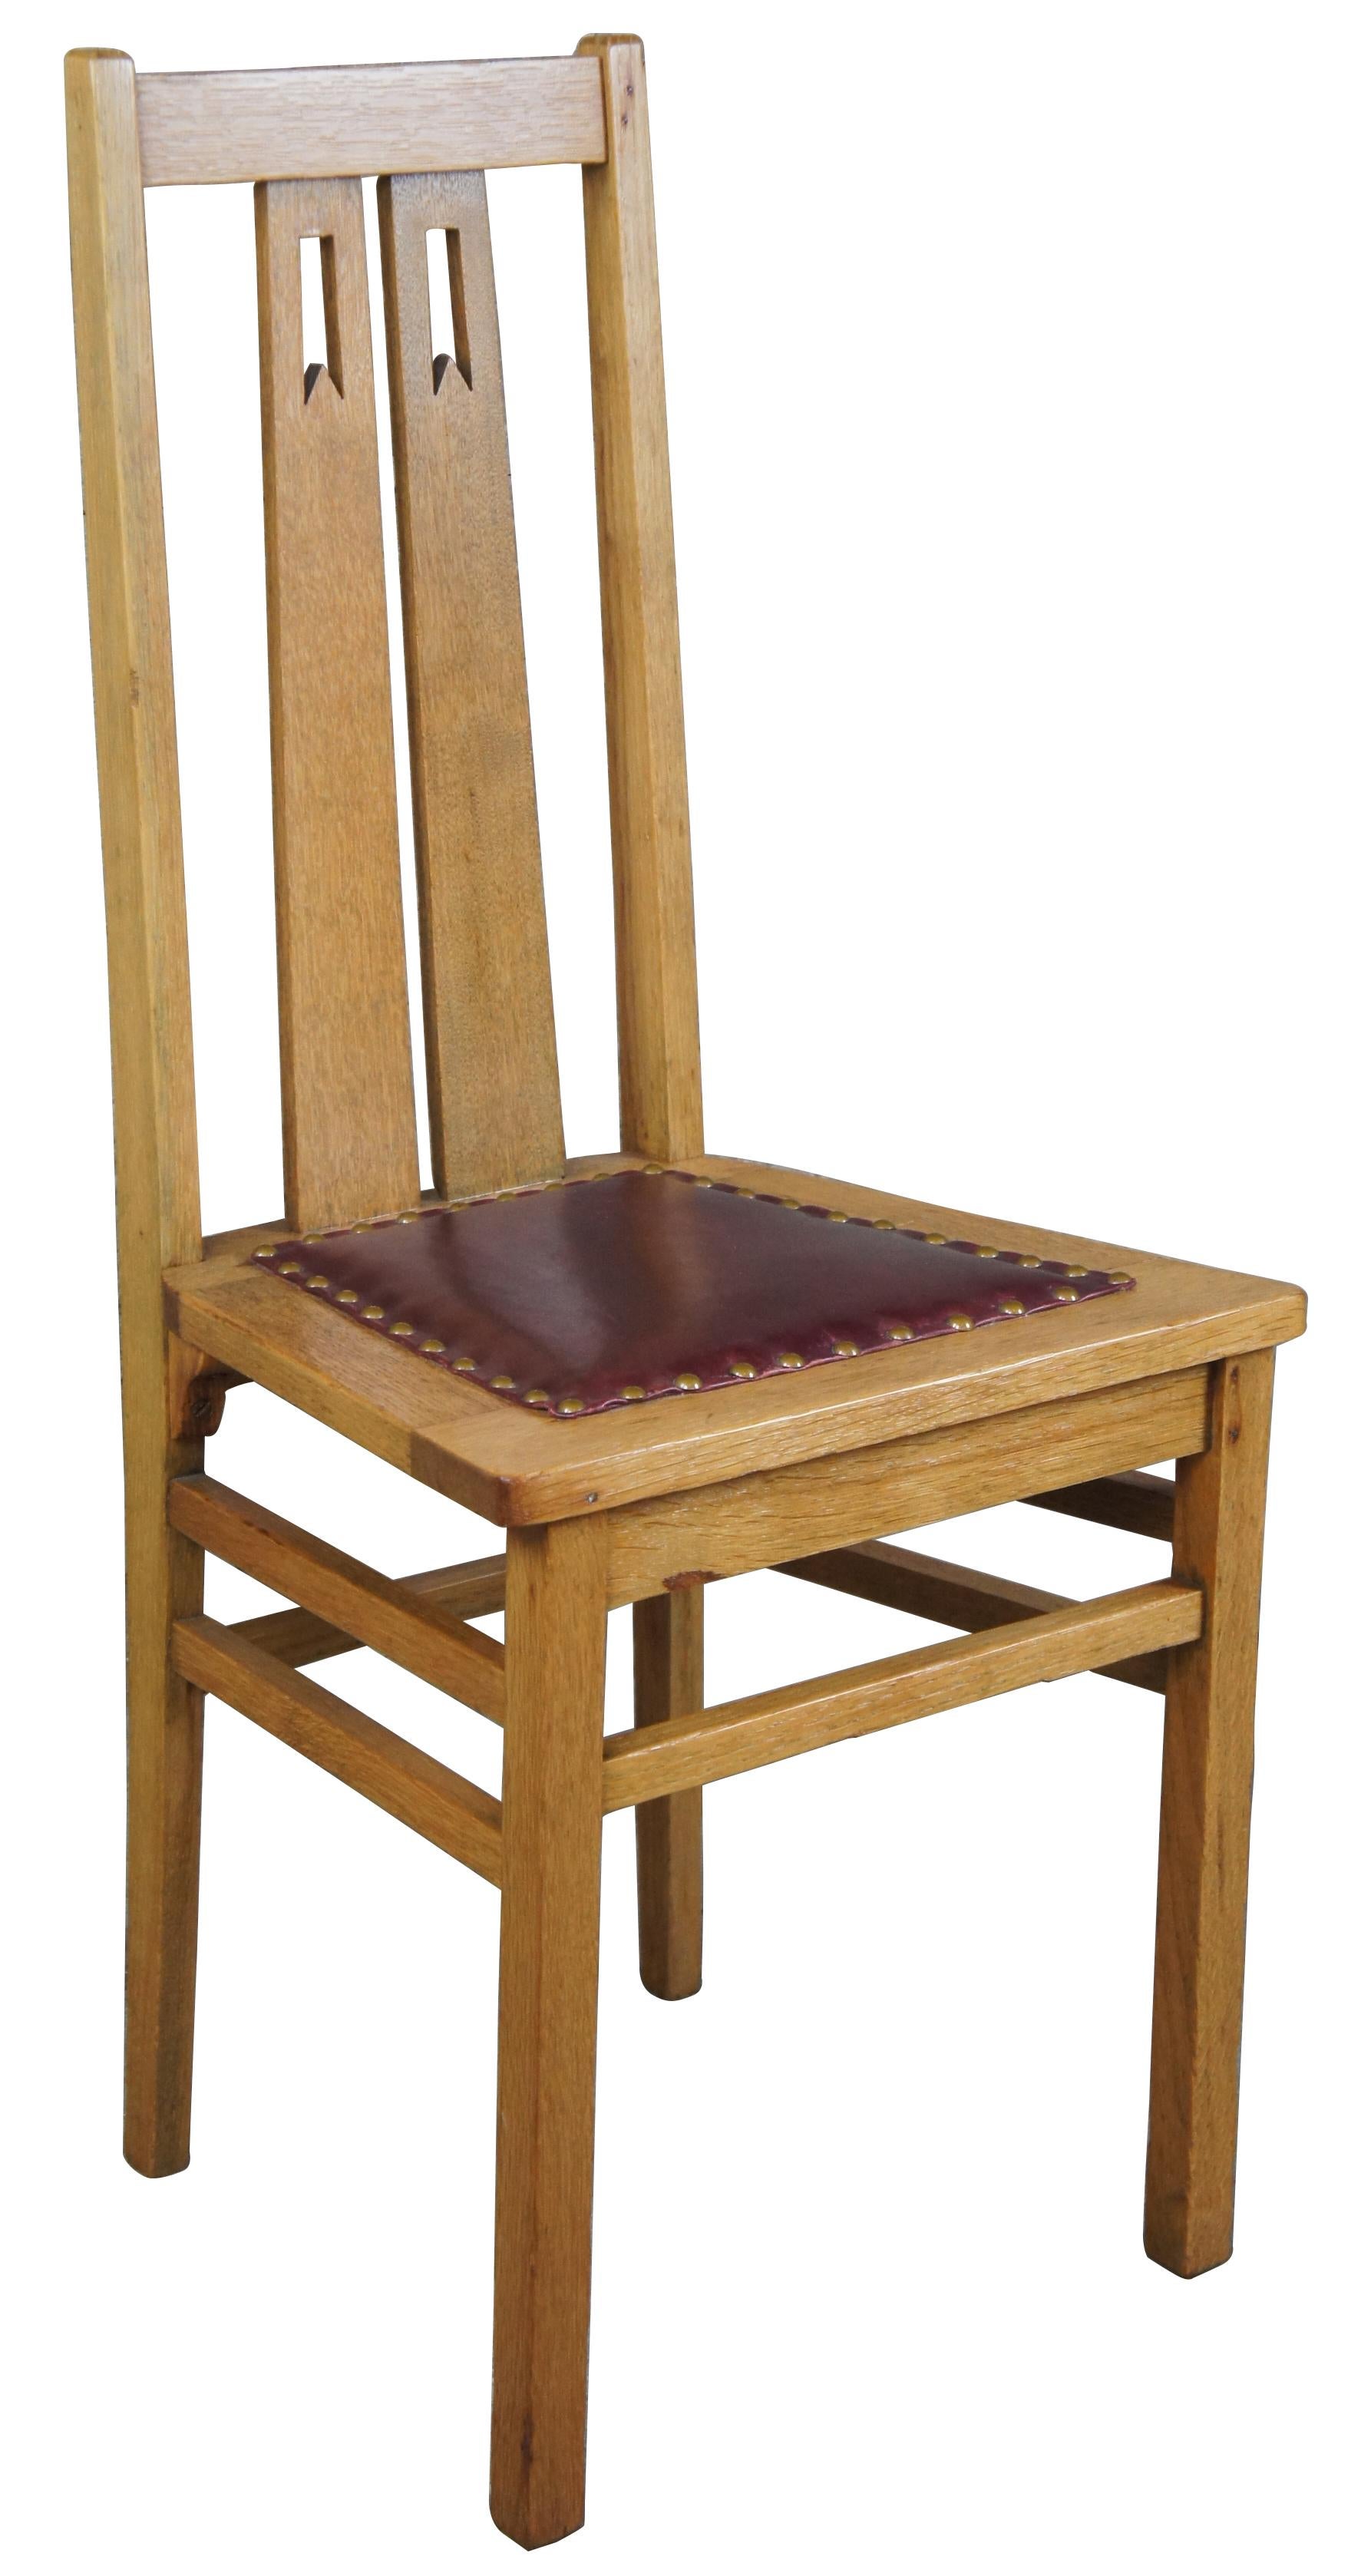 Arts & Crafts oak dining or side chair, circa 1920s. Features a burgundy leather seat with nailhead trim and a pierced rear splats with ribbon design.
  